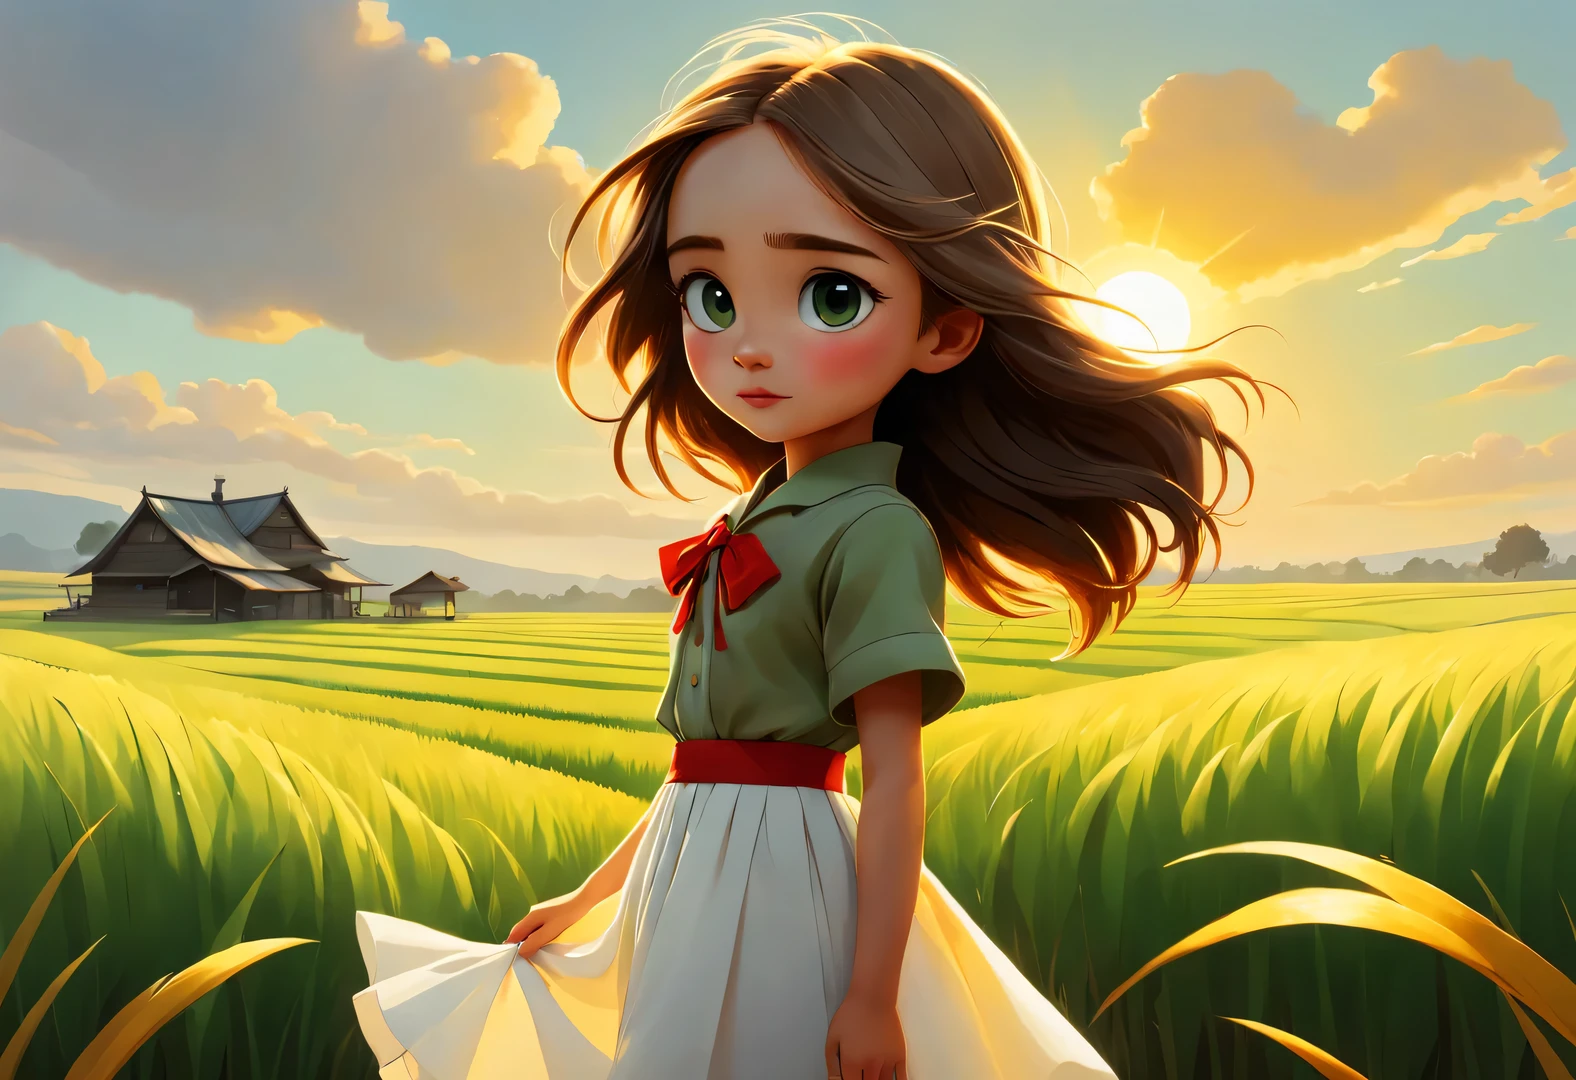 Bird&#39;s eye view digital art, In the endless rice fields, The back of a  standing，long hair，white skirt，bow tie, green, yellow, Kaneko, curry, A little red, slope, White farmhouse in the distance, breeze blows, Rice swaying in the wind, Sunlight, happy atmosphere, Stripes Circles and Stripes Circles and Shapes Stripes, National Geographic National Geographic, annie lebovetz,,A beautiful painting by Wassily Kandinsky,Imagined,Imaginative,Japanese cartoons,romantic atmosphere,high detail,watercolor painting,palette knife painting,comics,artwork,Pixar style,cartoon style,Arte Guélan's artwork,Chinese painting,masterpiece,Line art,Quixel Megascans rendering,octane rendering,depth of field (degrees of ),extreme long shot,flashing light, --original style